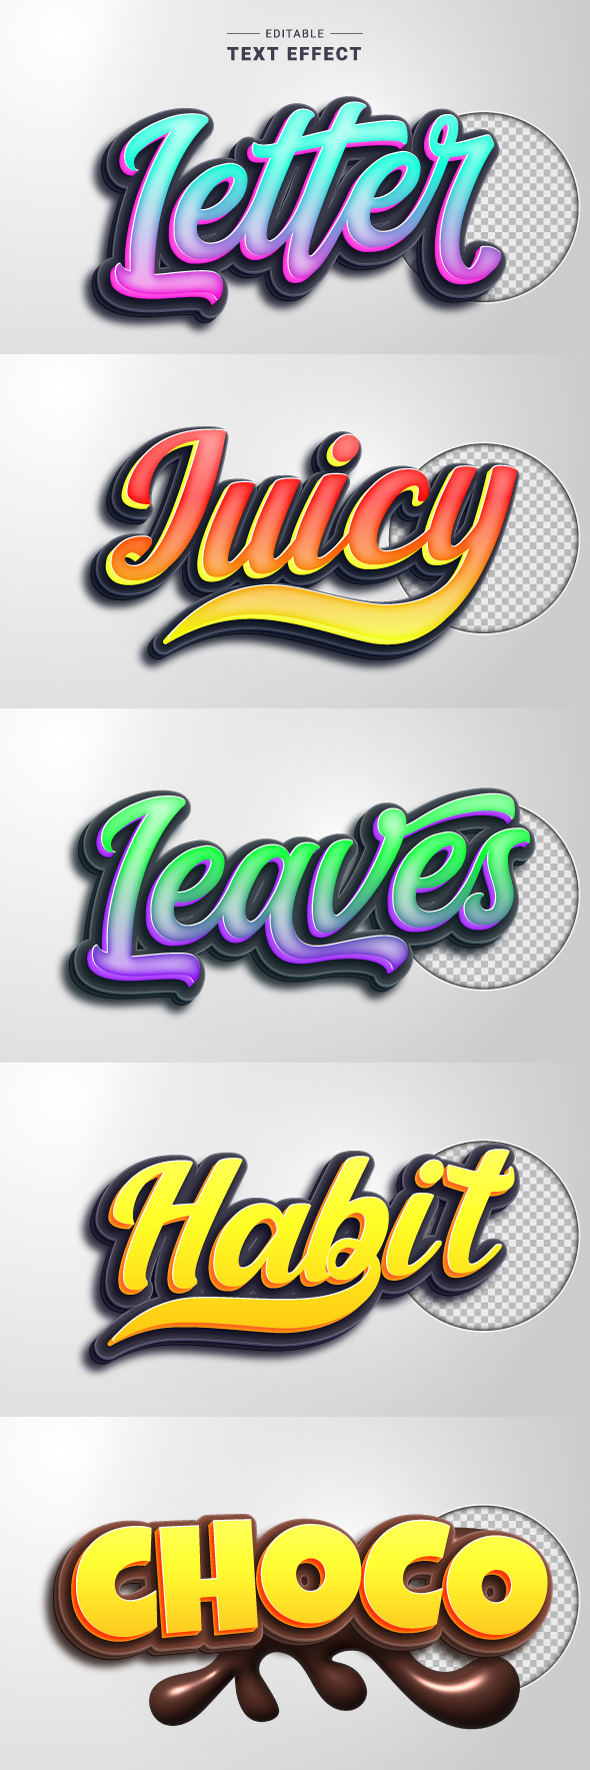 3D Lettering Text Effects